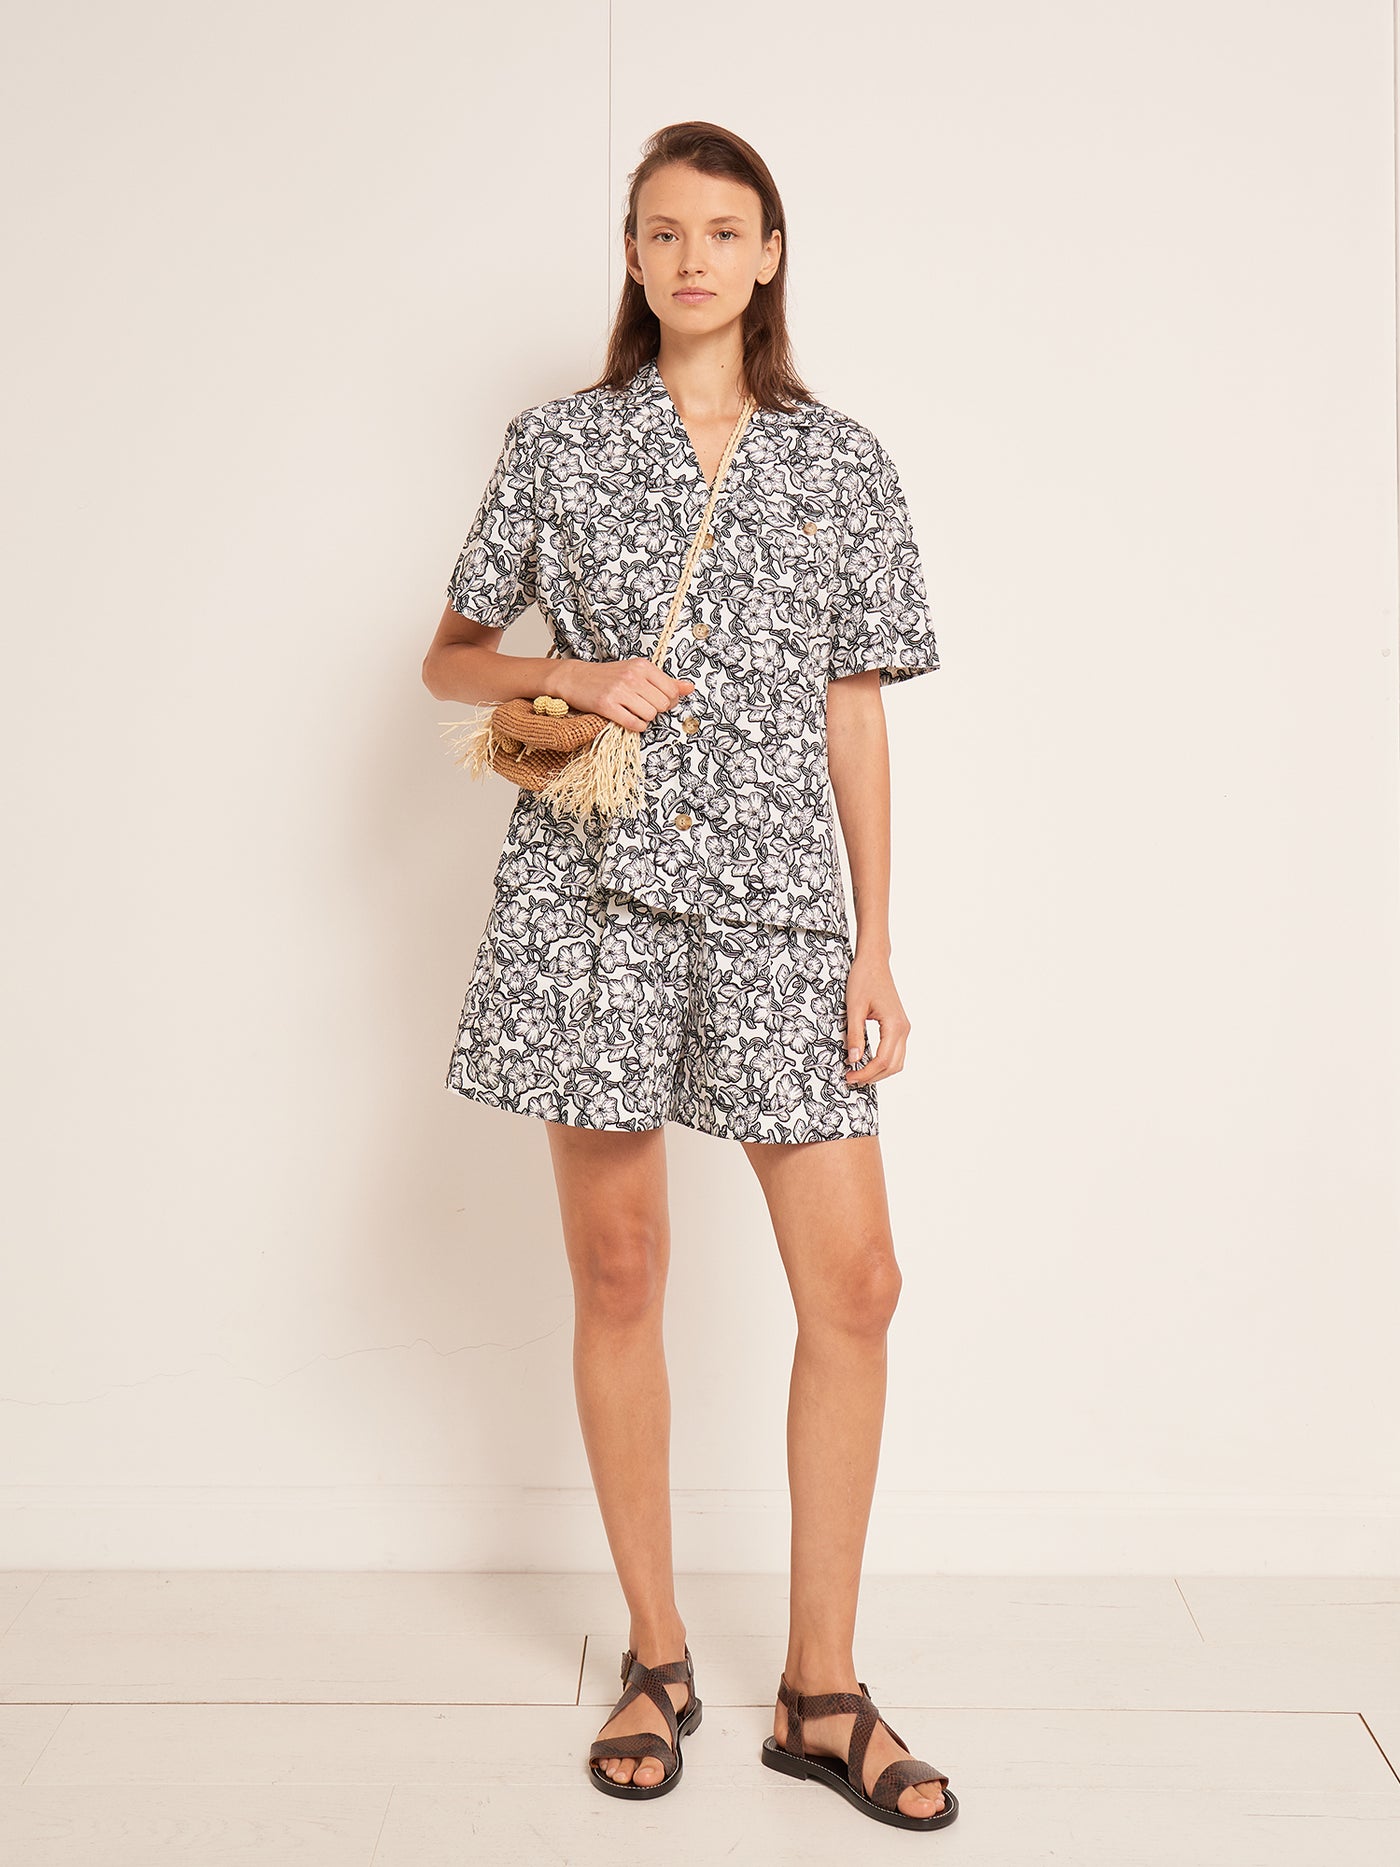 SUMMER 2023 WOMAN'S LOOK PATTERNED SHIRT